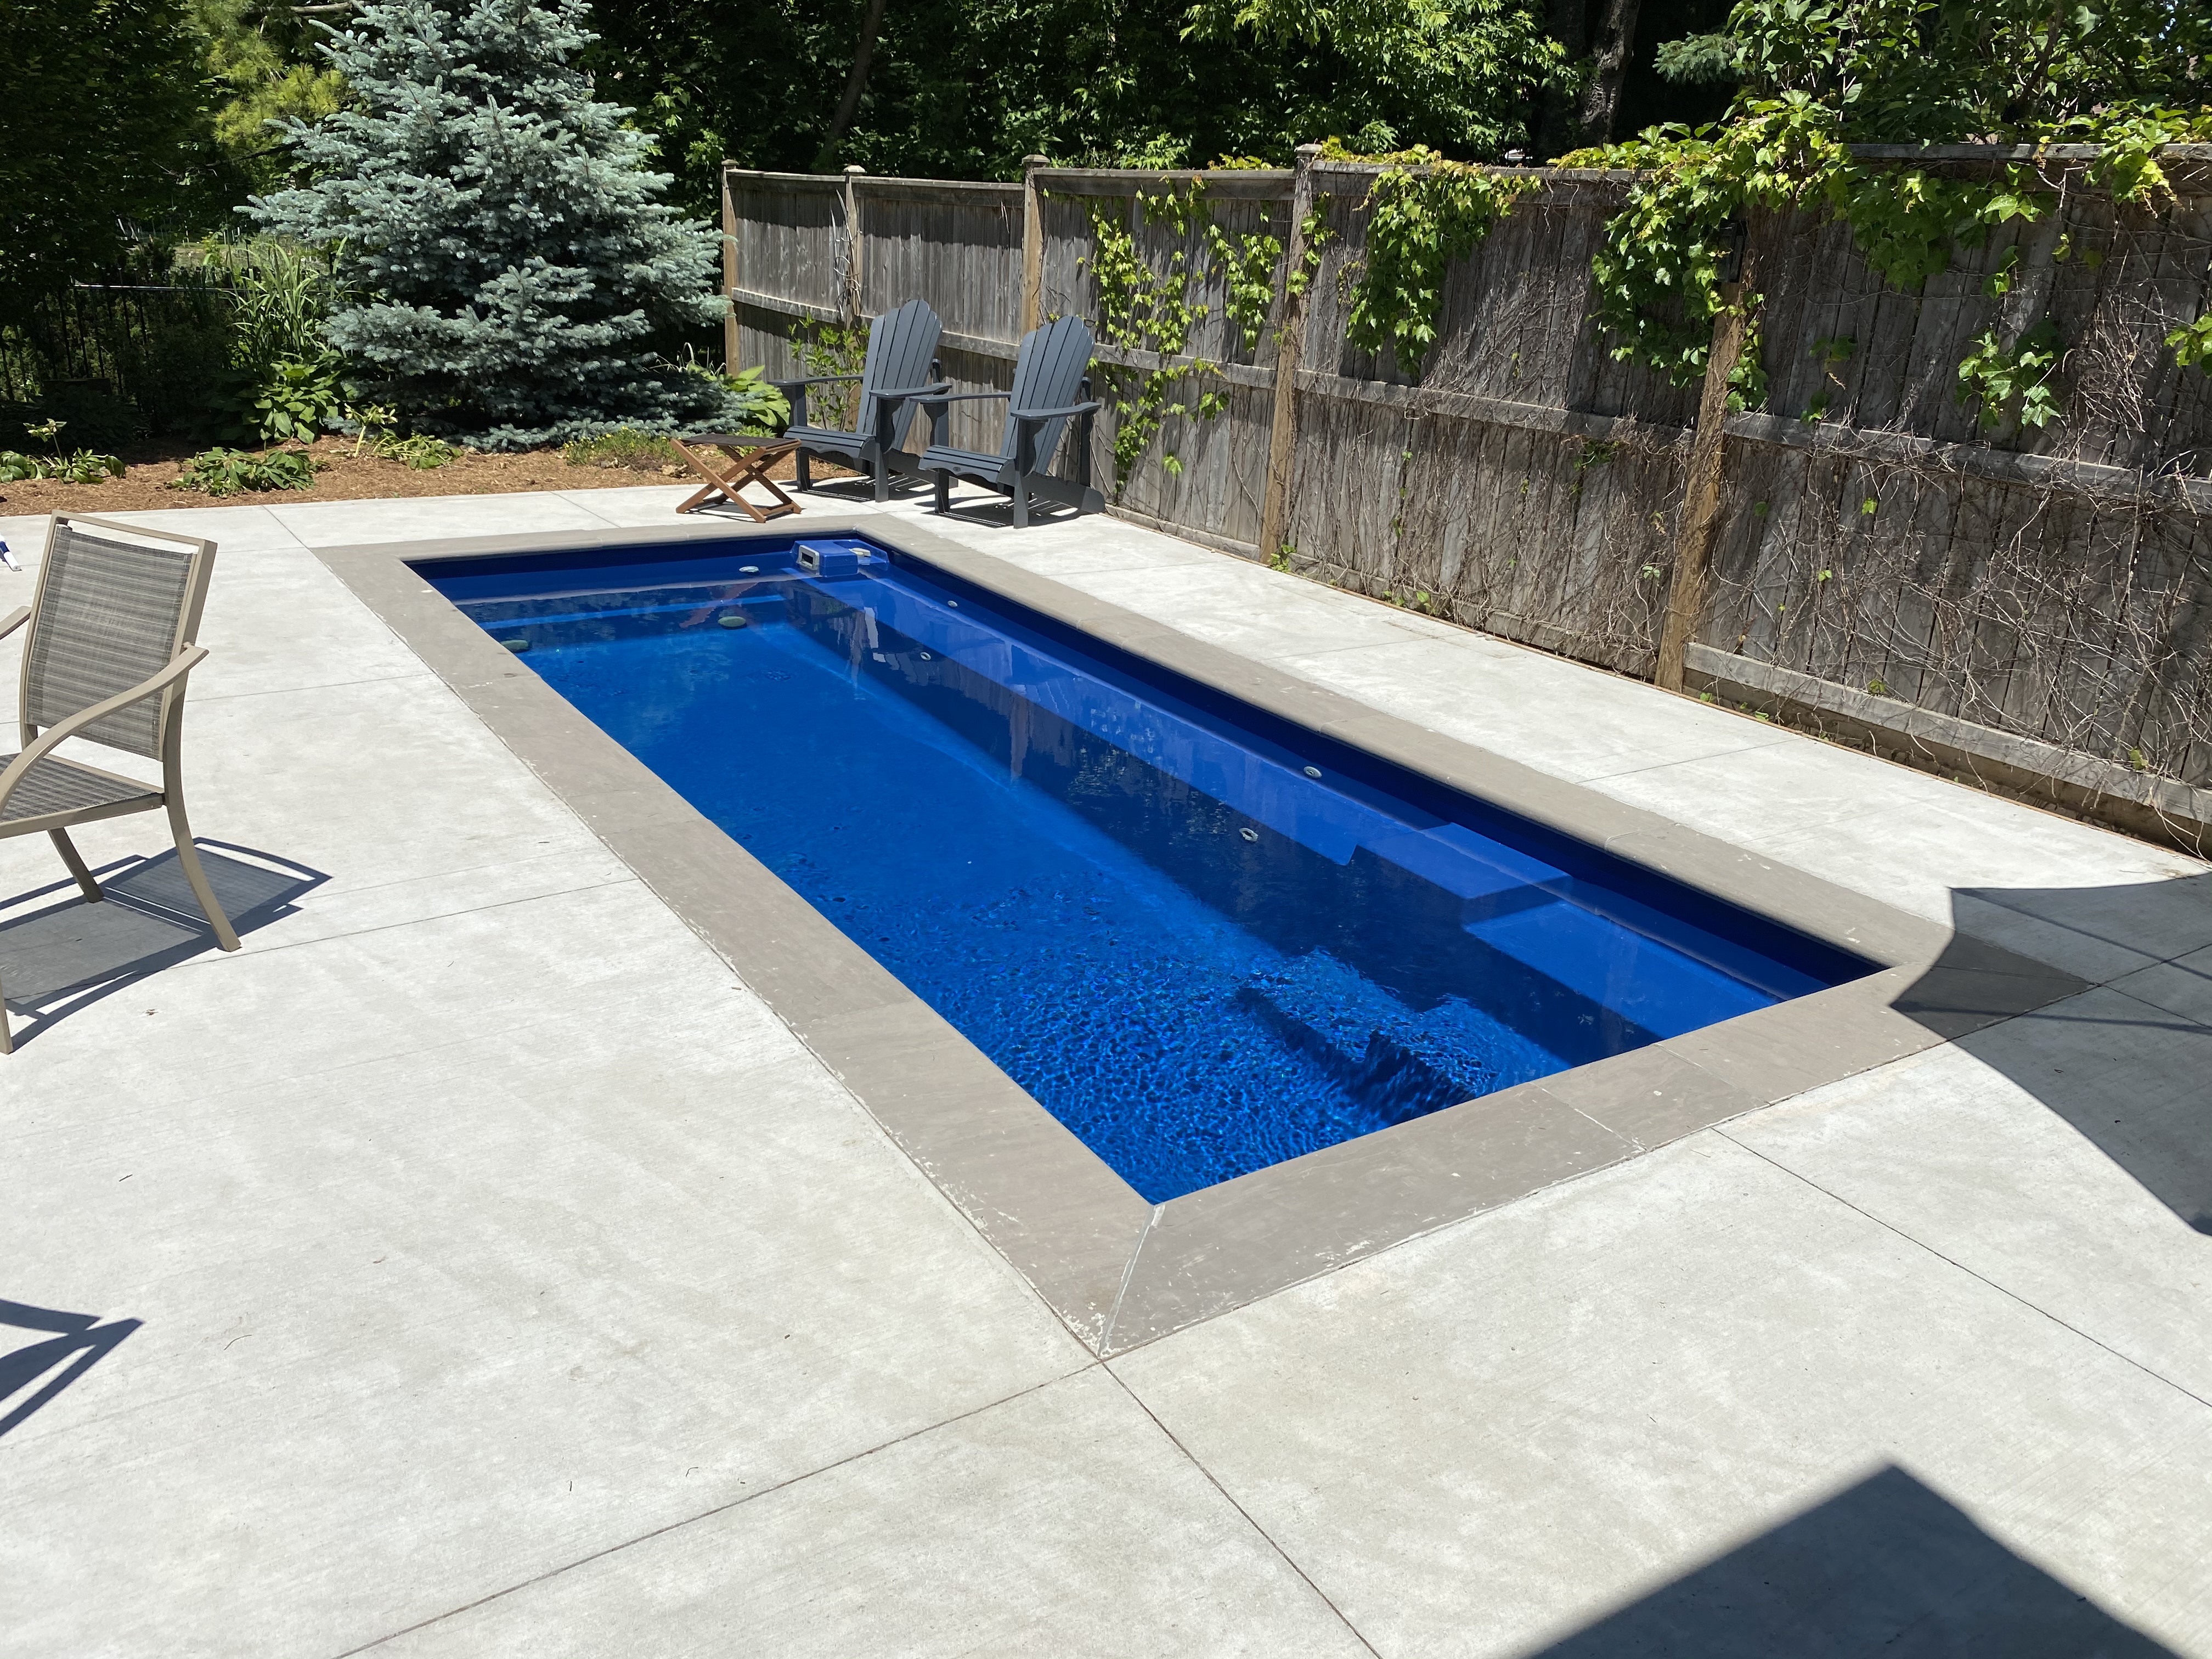 Is a Plunge Pool Right for You? - Leisure Pools Canada